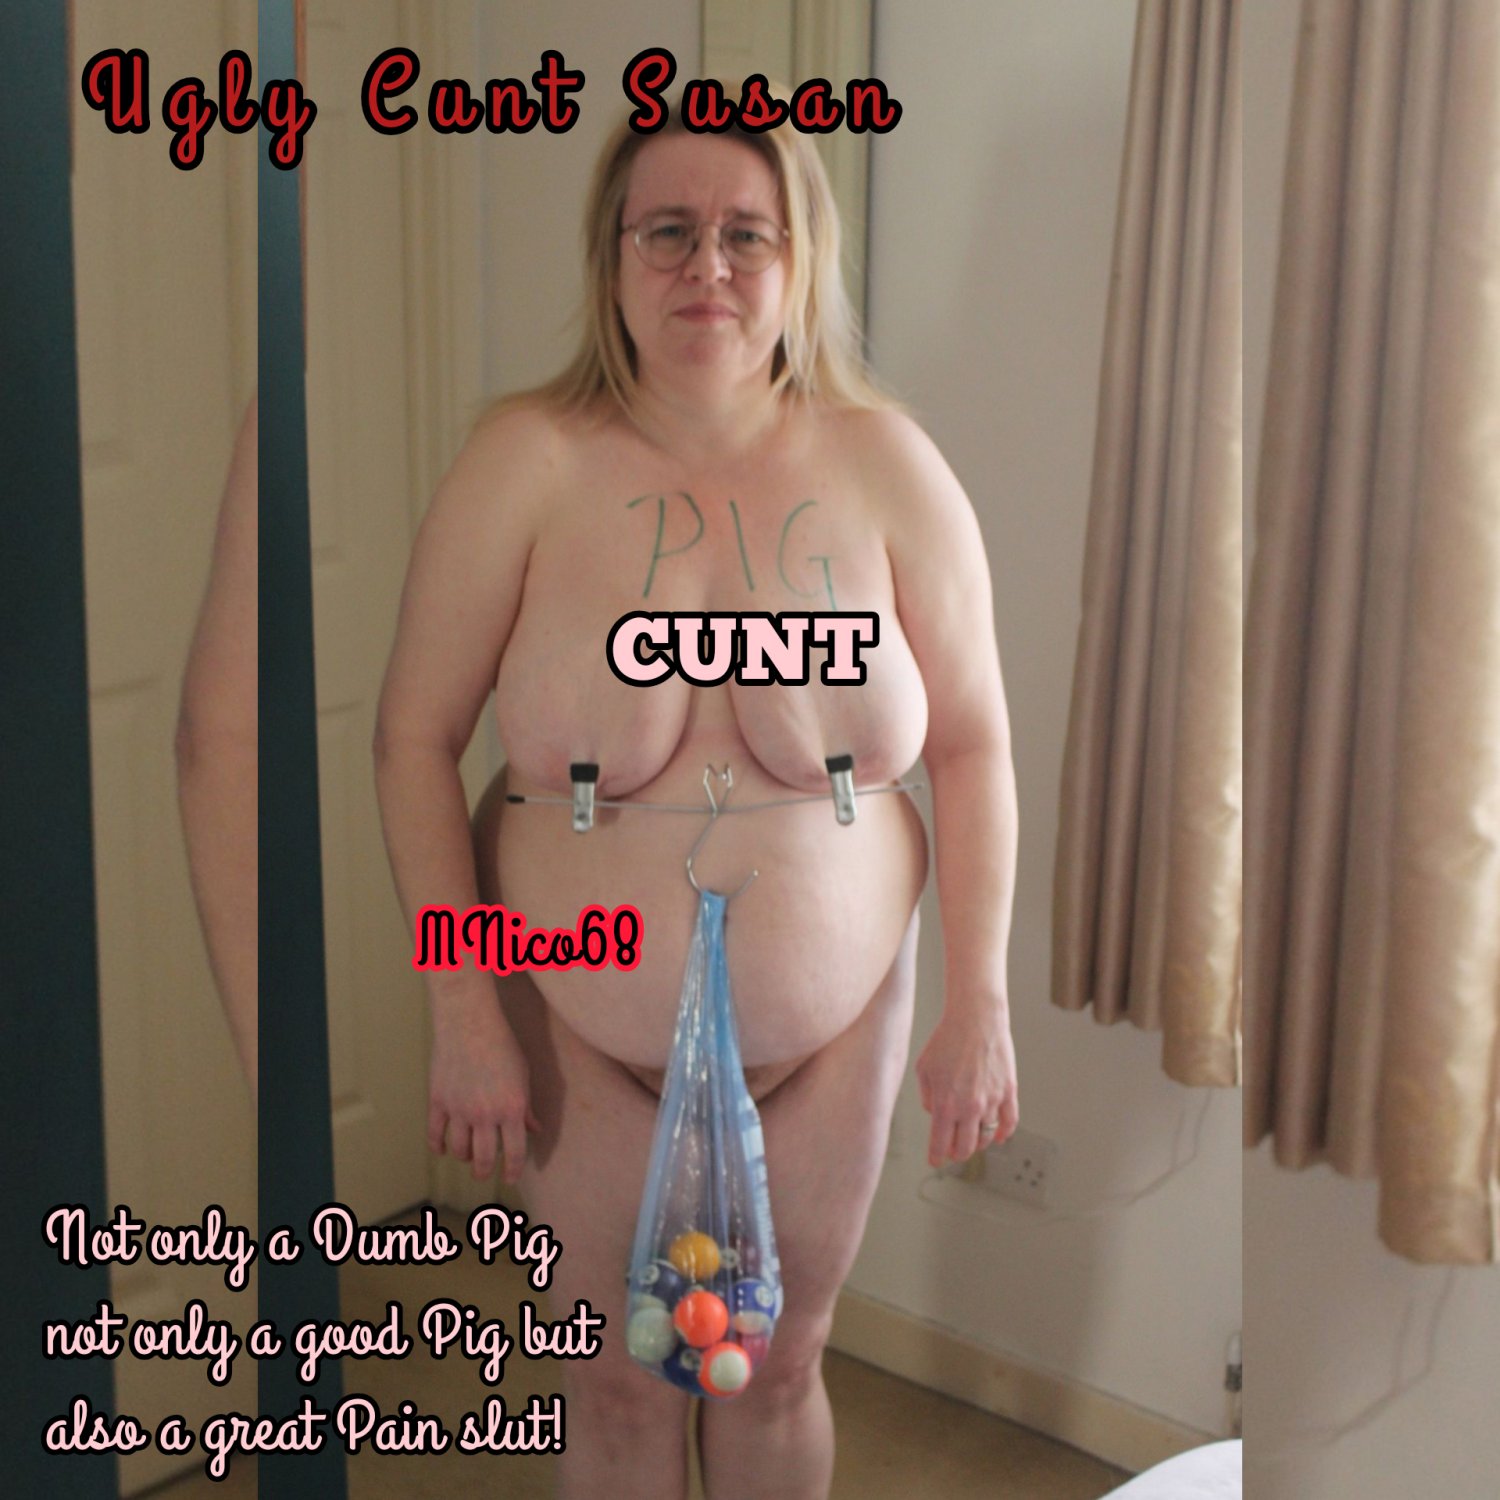 Ugly Cunt Susan, UK Fat Pig to use/abuse/humiliation,comment on... photo